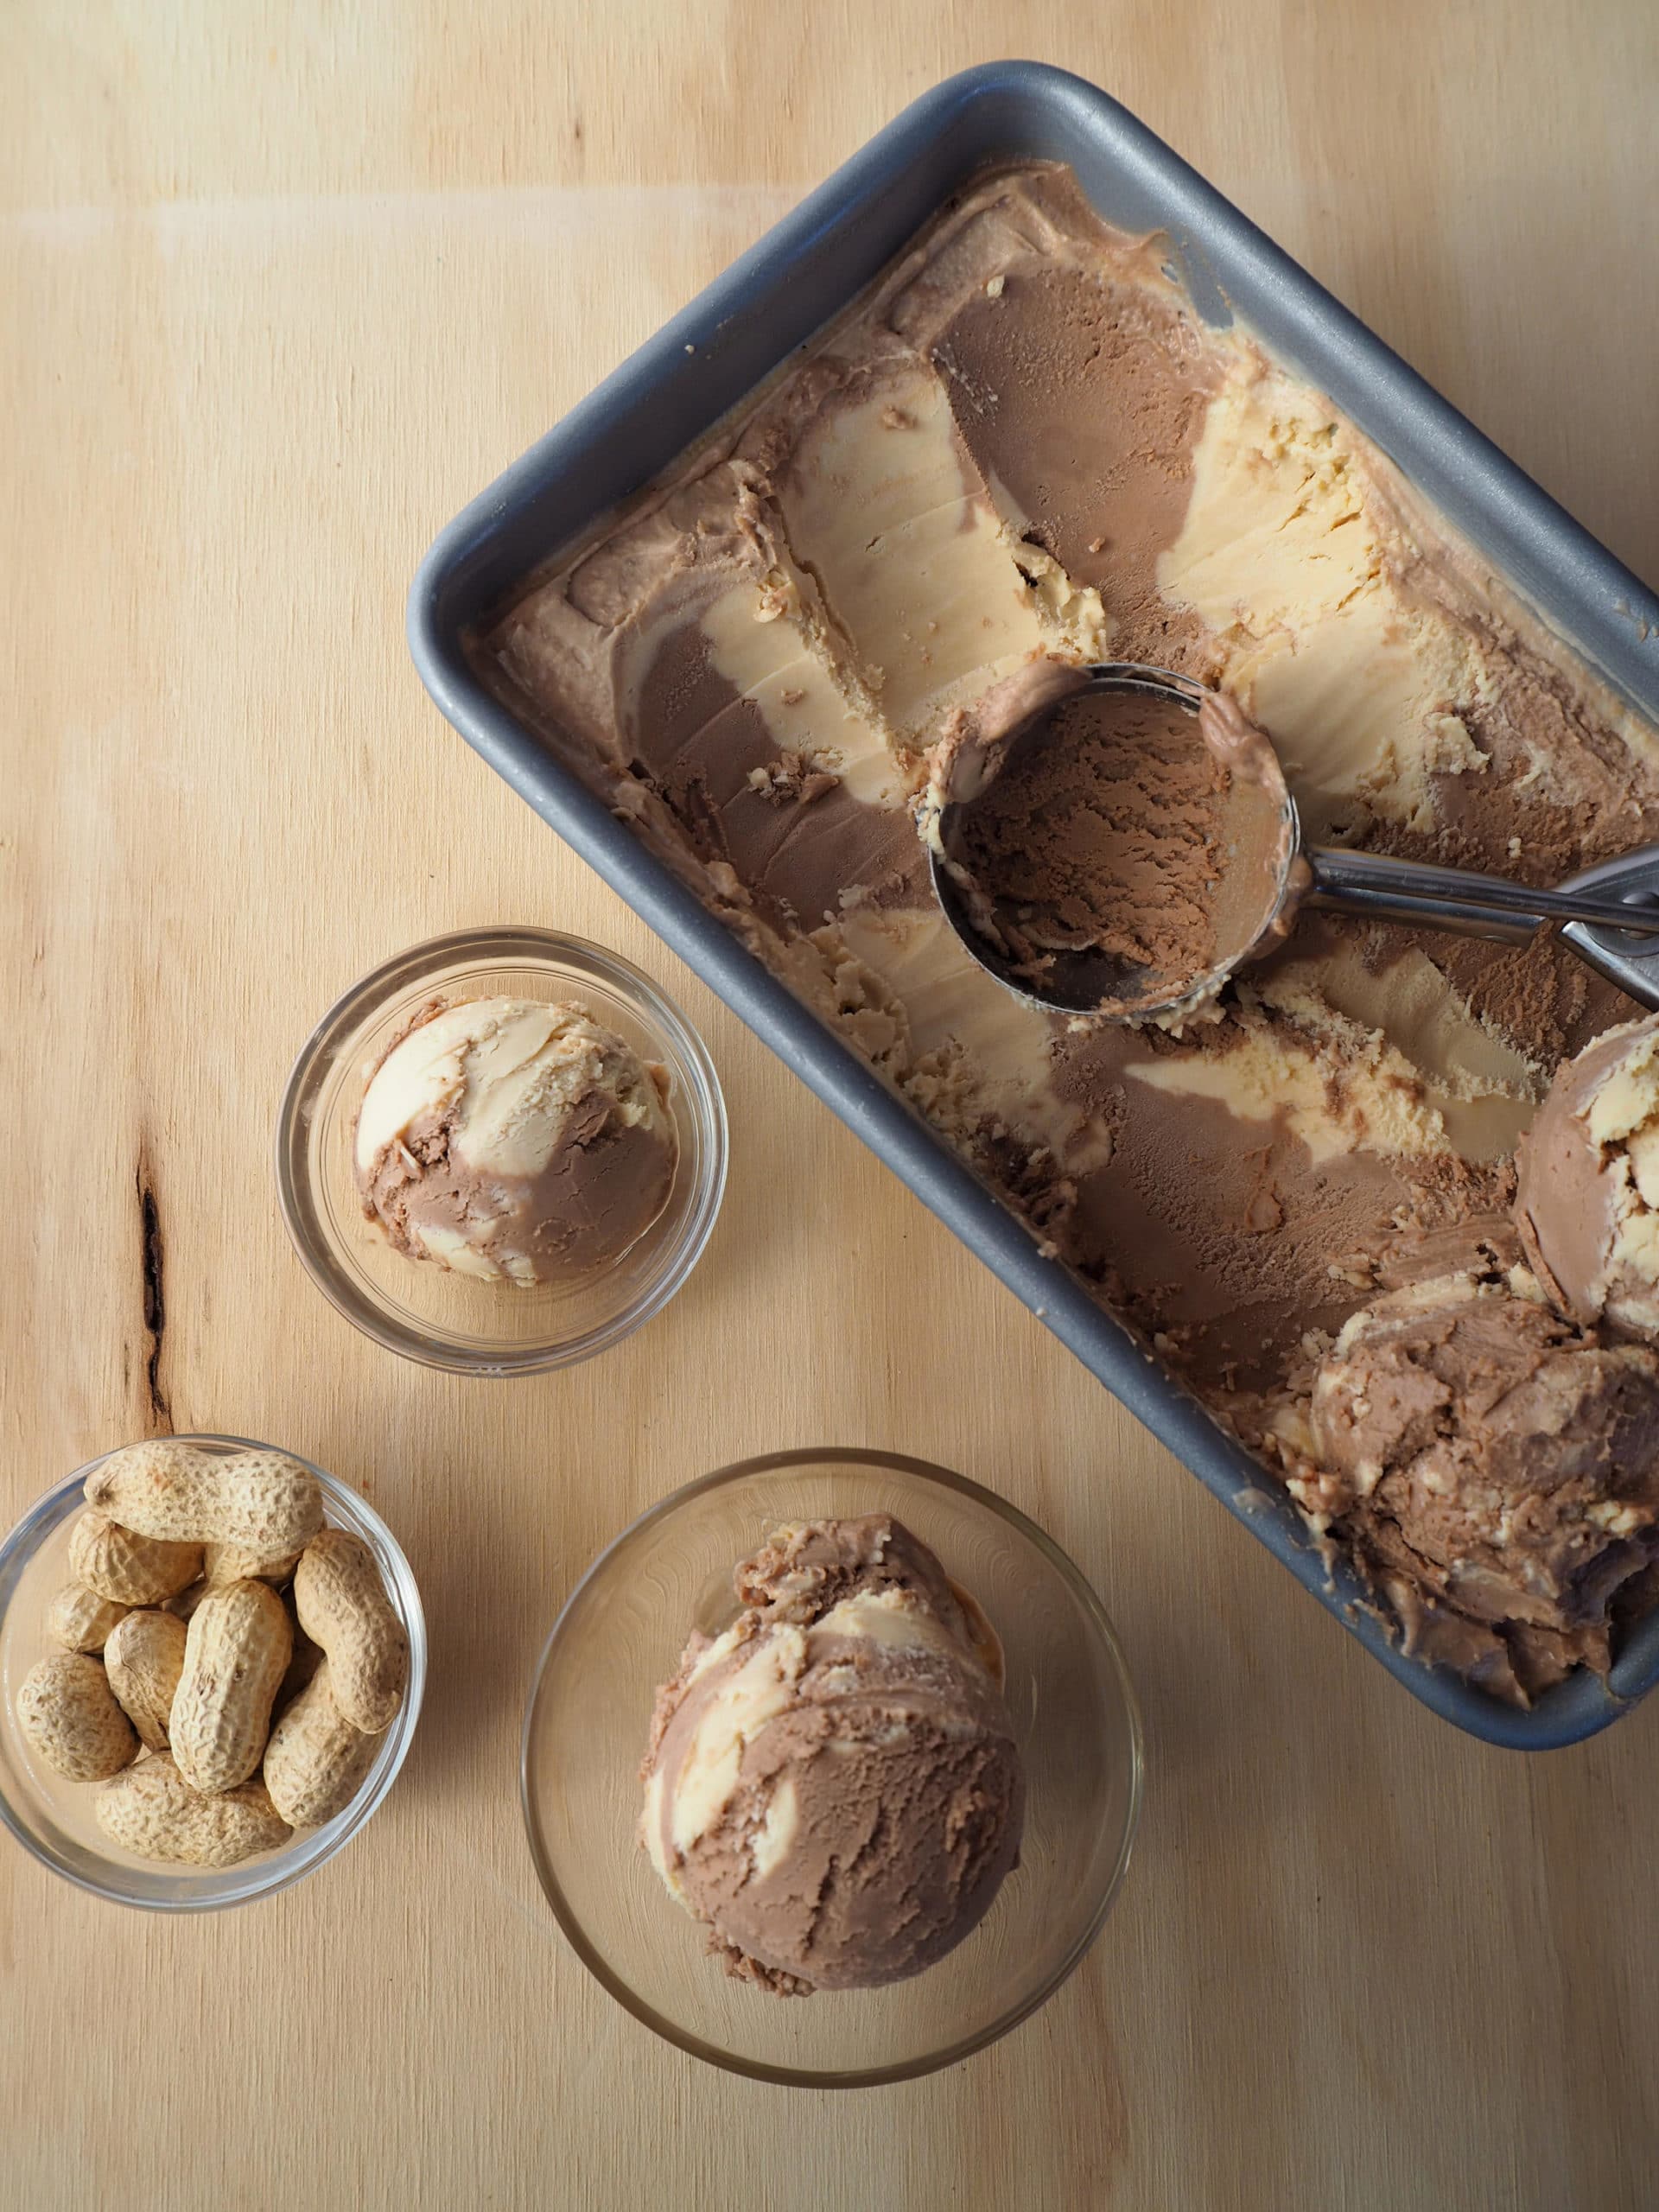 Nutella peanut butter ice cream with two scoops